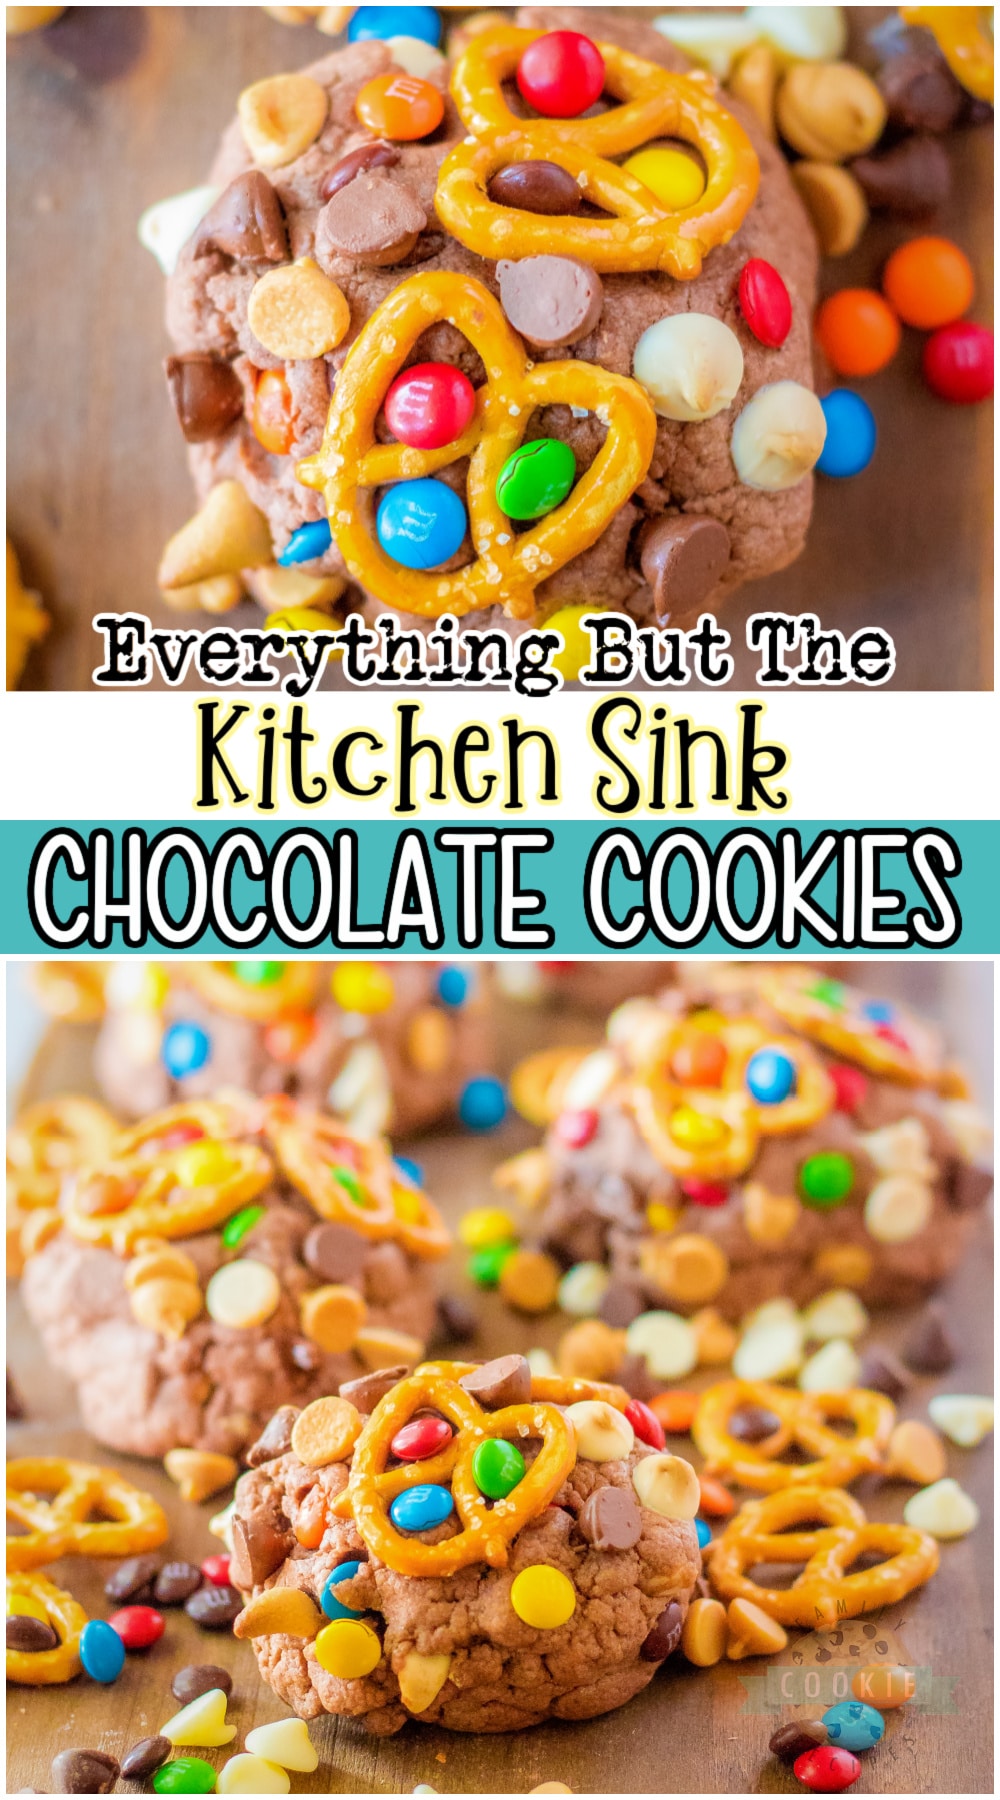 Everything But the Kitchen Sink Cookies for when you just don't know what kind to make! Delicious loaded chocolate cookie recipe with sweet & salty baked into every bite! #cookies #kitchensink #peanutbutter #chocolate #sweetsalty #easyrecipe from FAMILY COOKIE RECIPES via @buttergirls